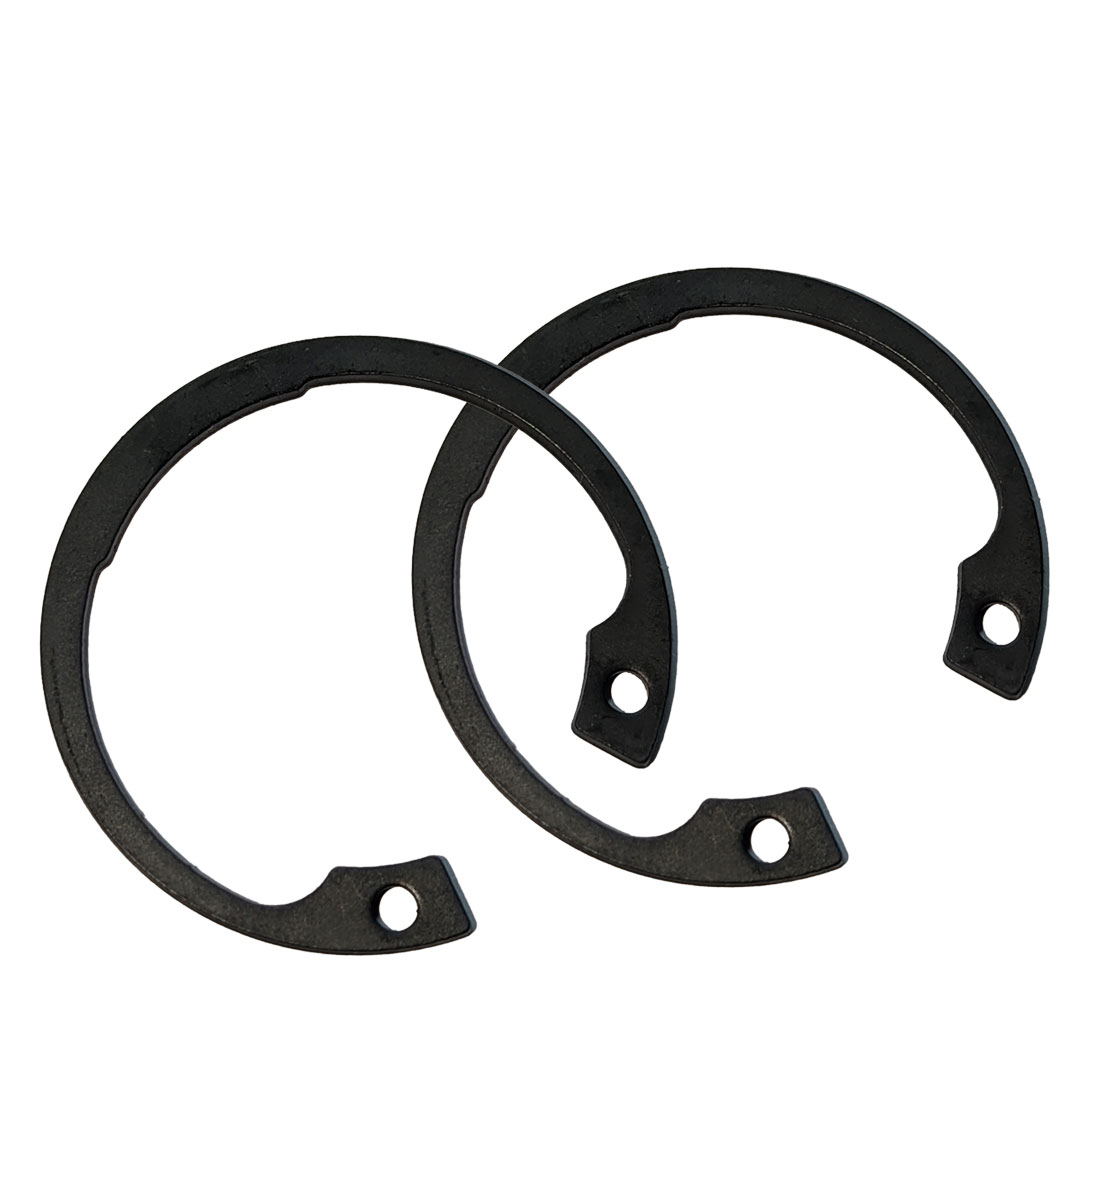 Pair of Circlips for 3/4" COM12T Bearing